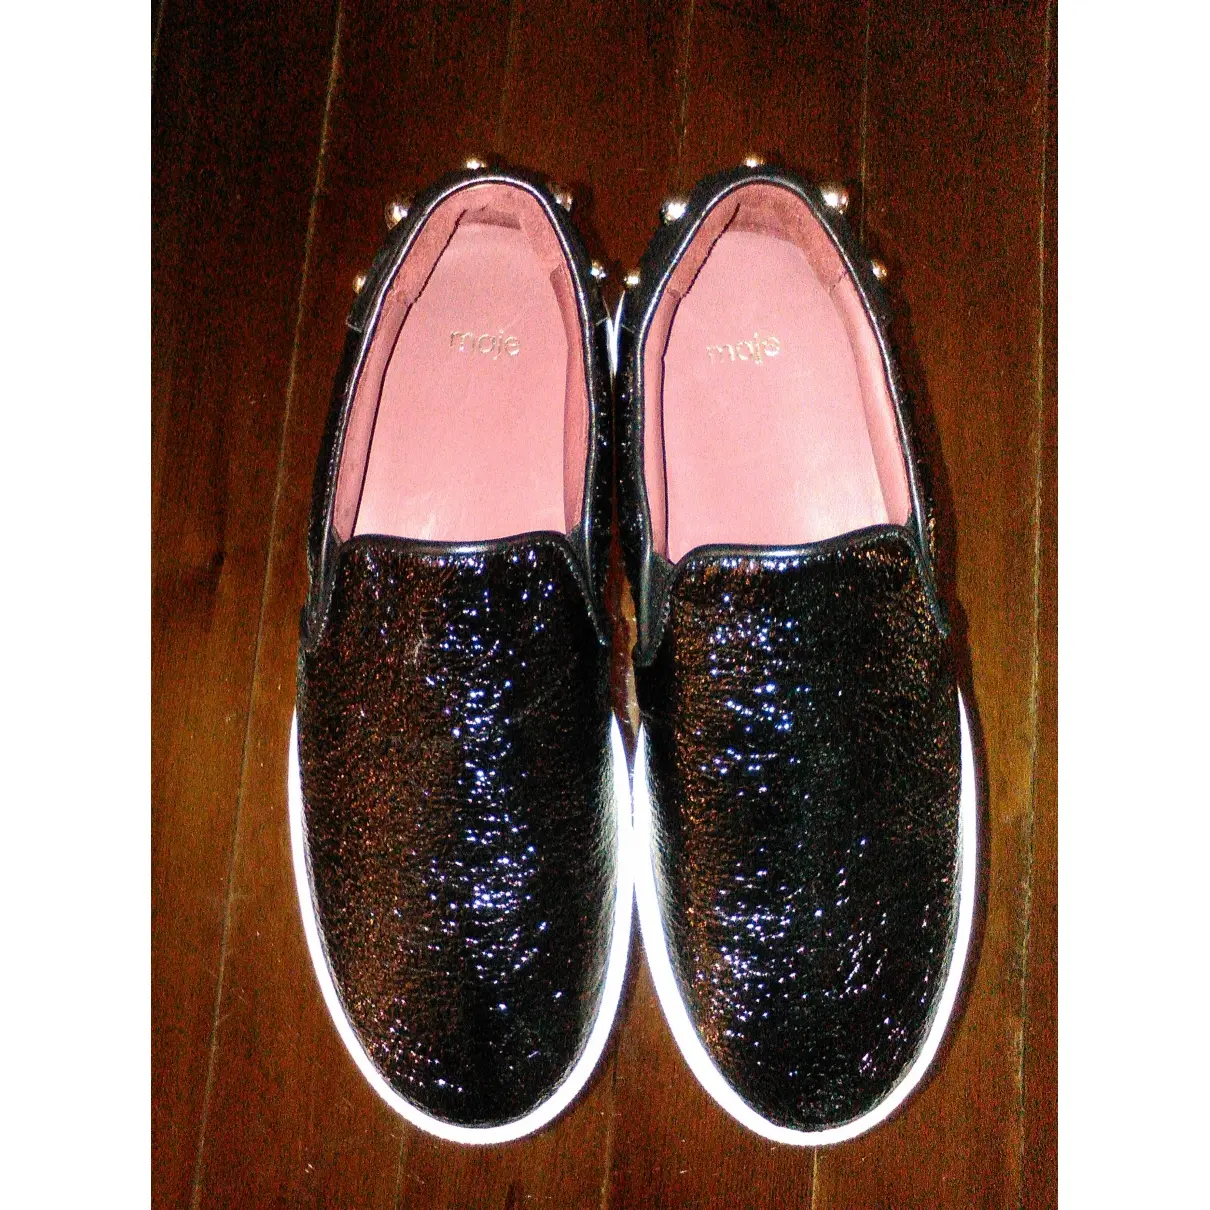 Maje Patent leather trainers for sale